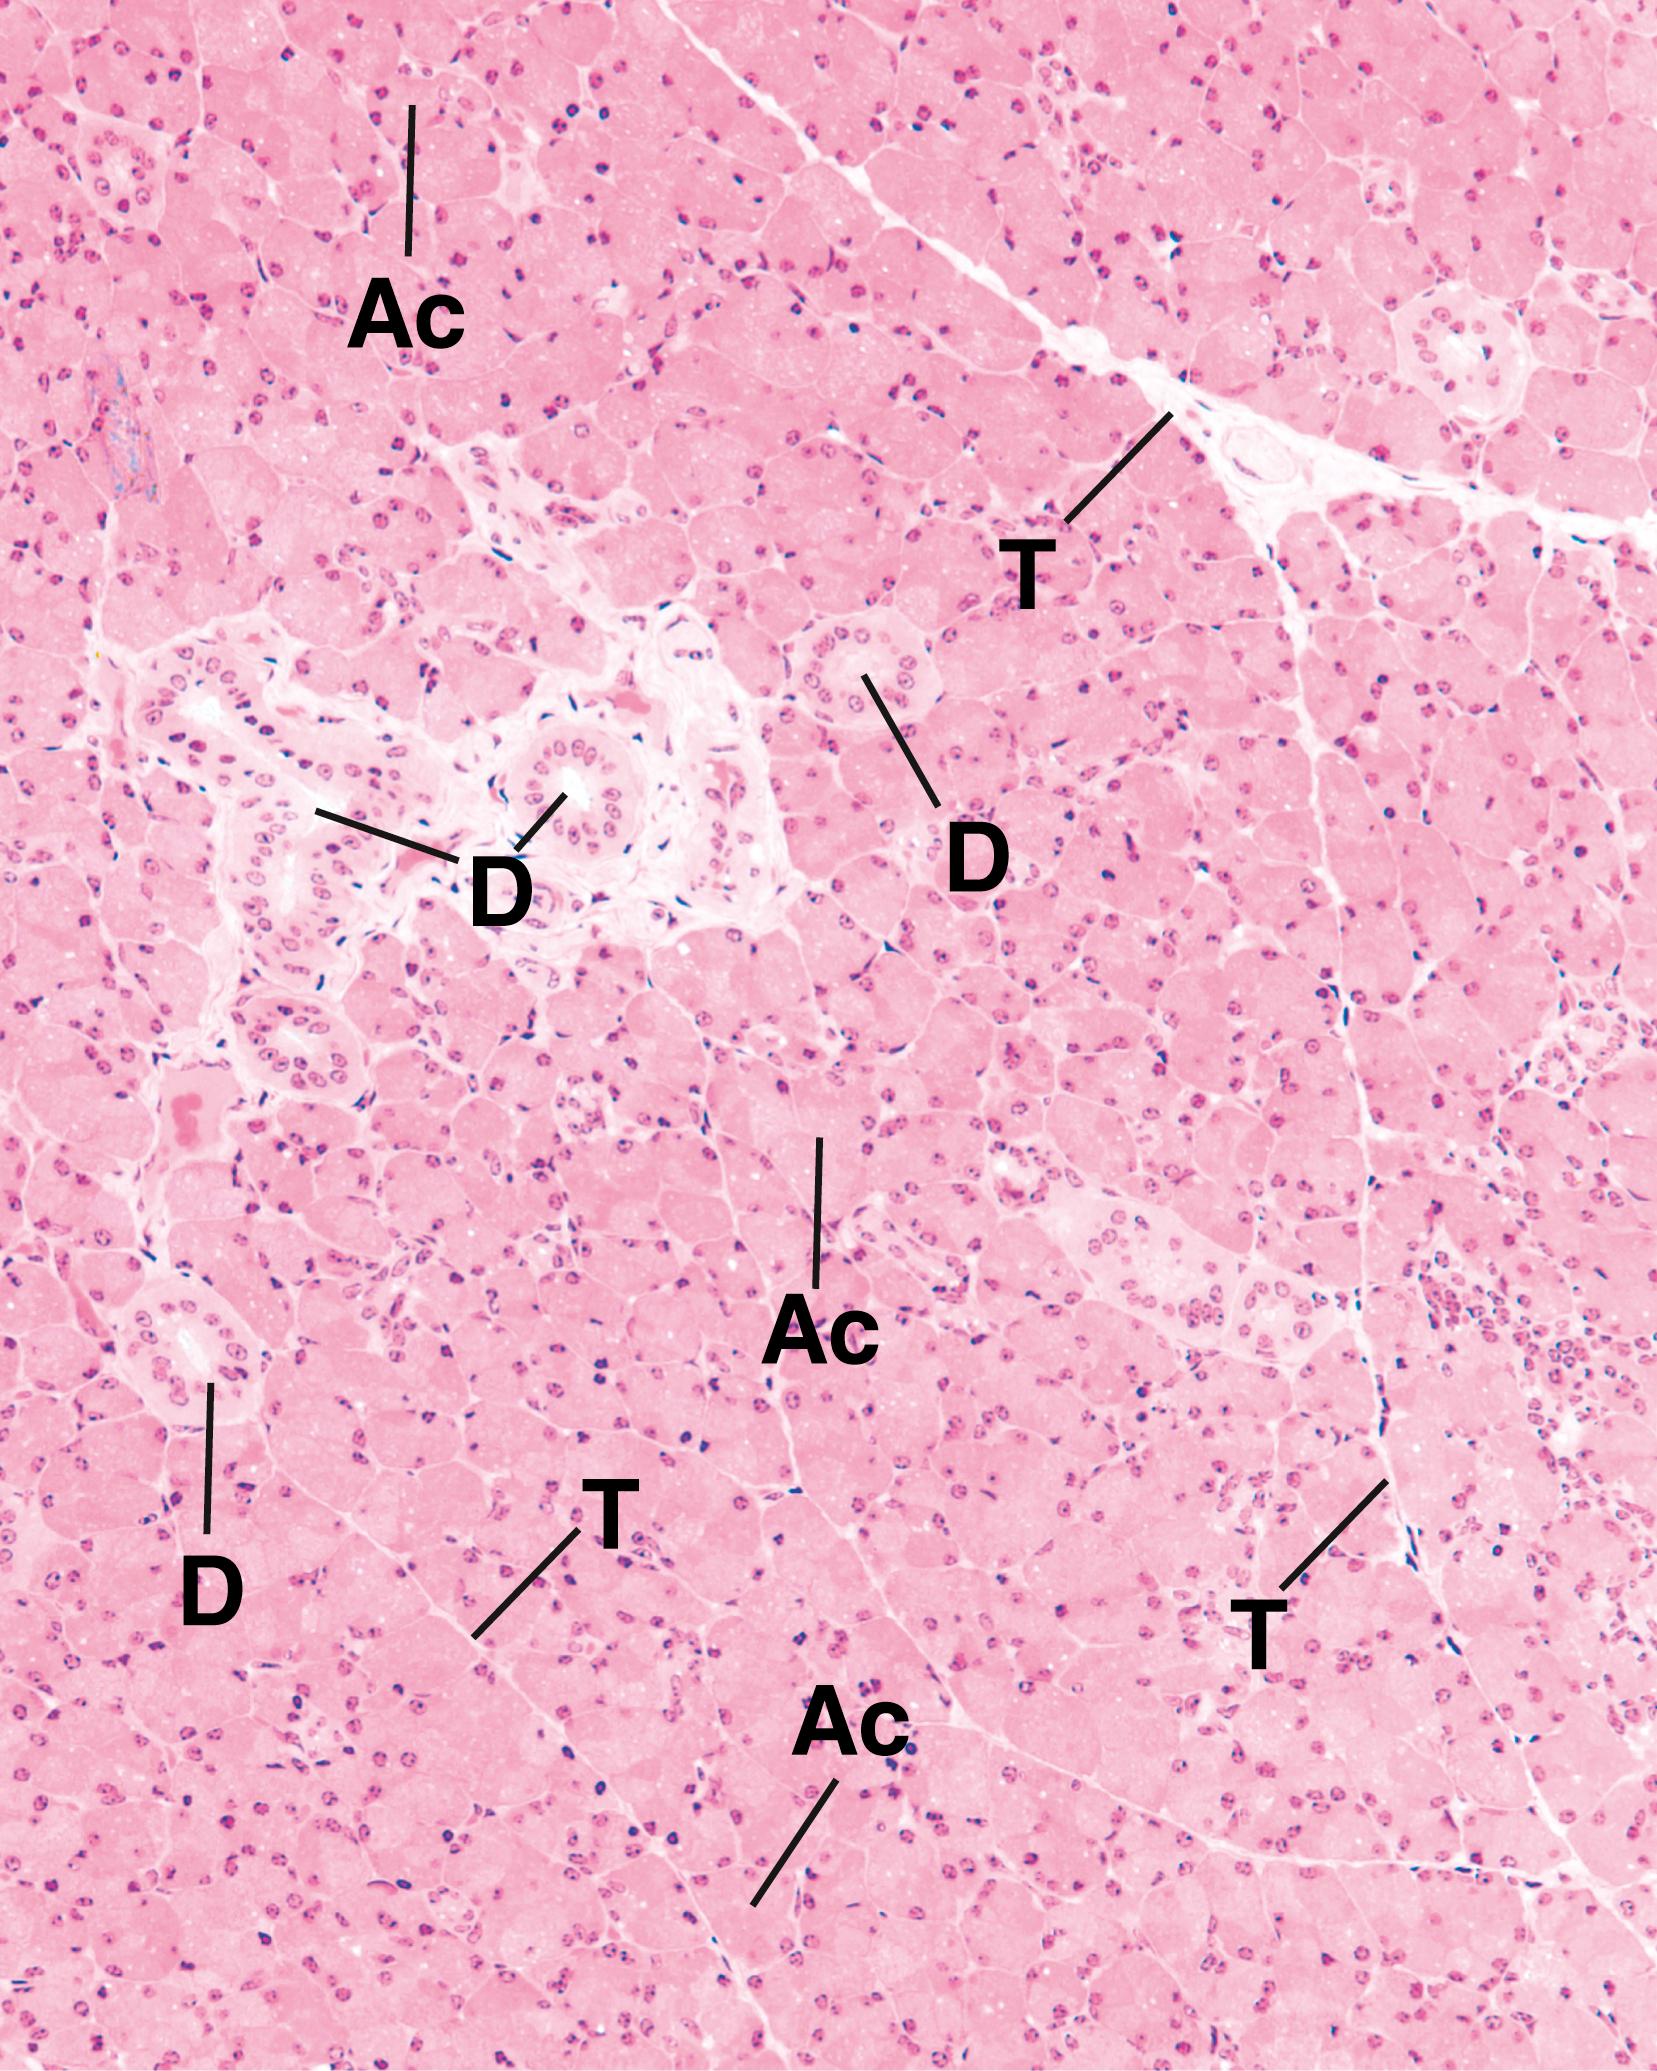 Fig. 18.4, This low-magnification photomicrograph of the parotid gland lobe displays how the septa (T) subdivide the gland into lobules. Note that the acini (Ac) are composed of serous cells with round nuclei. The numerous ducts deliver the saliva into the oral cavity. (×132)